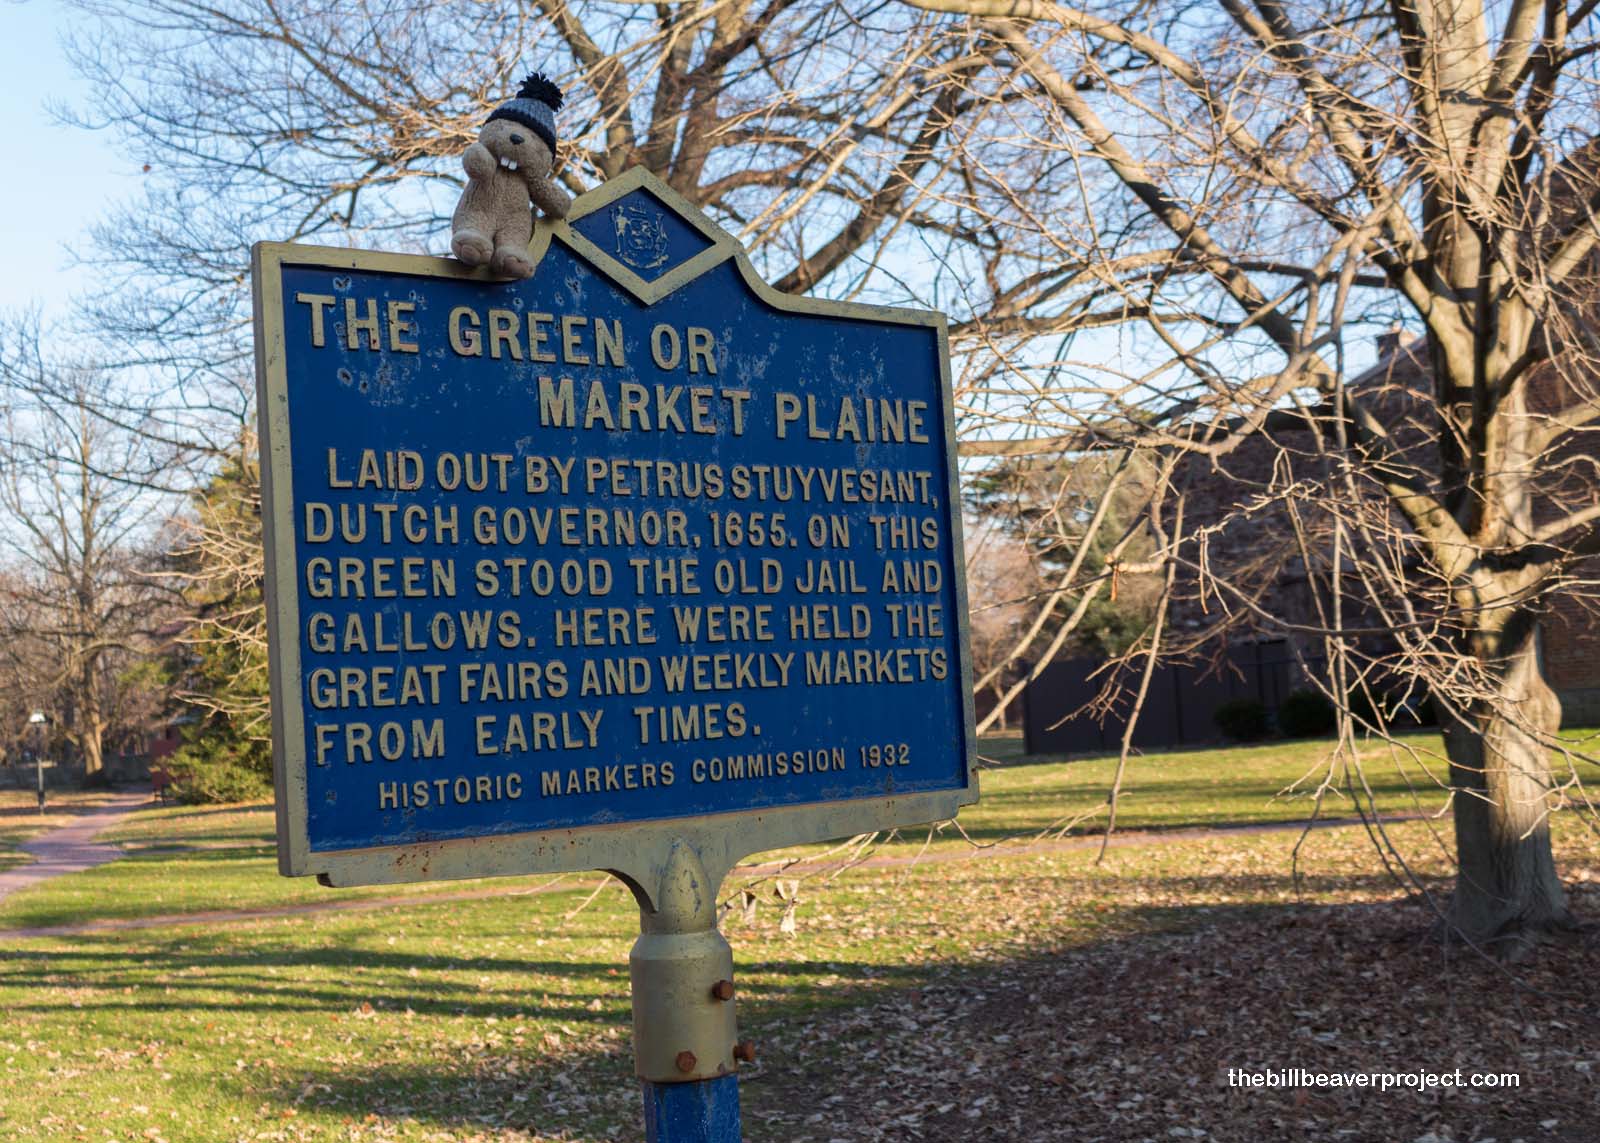 The Green or Market Plaine